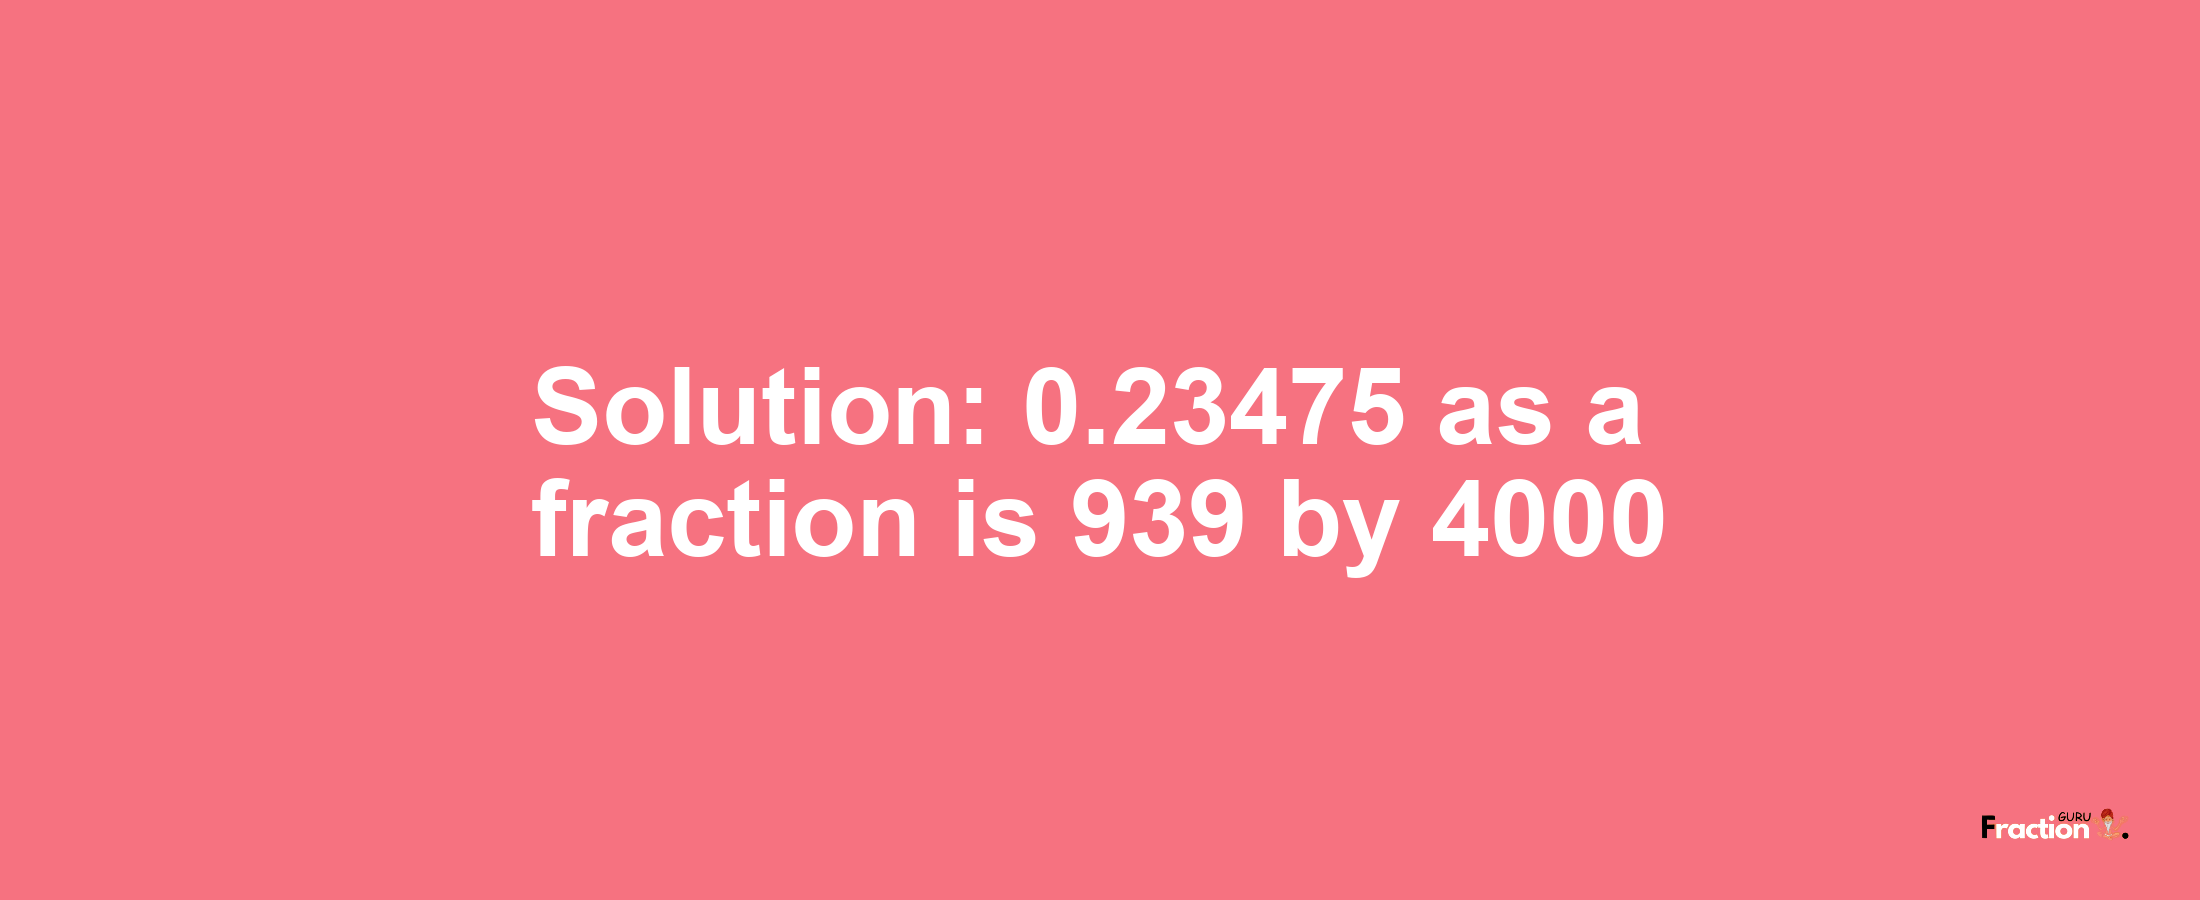 Solution:0.23475 as a fraction is 939/4000